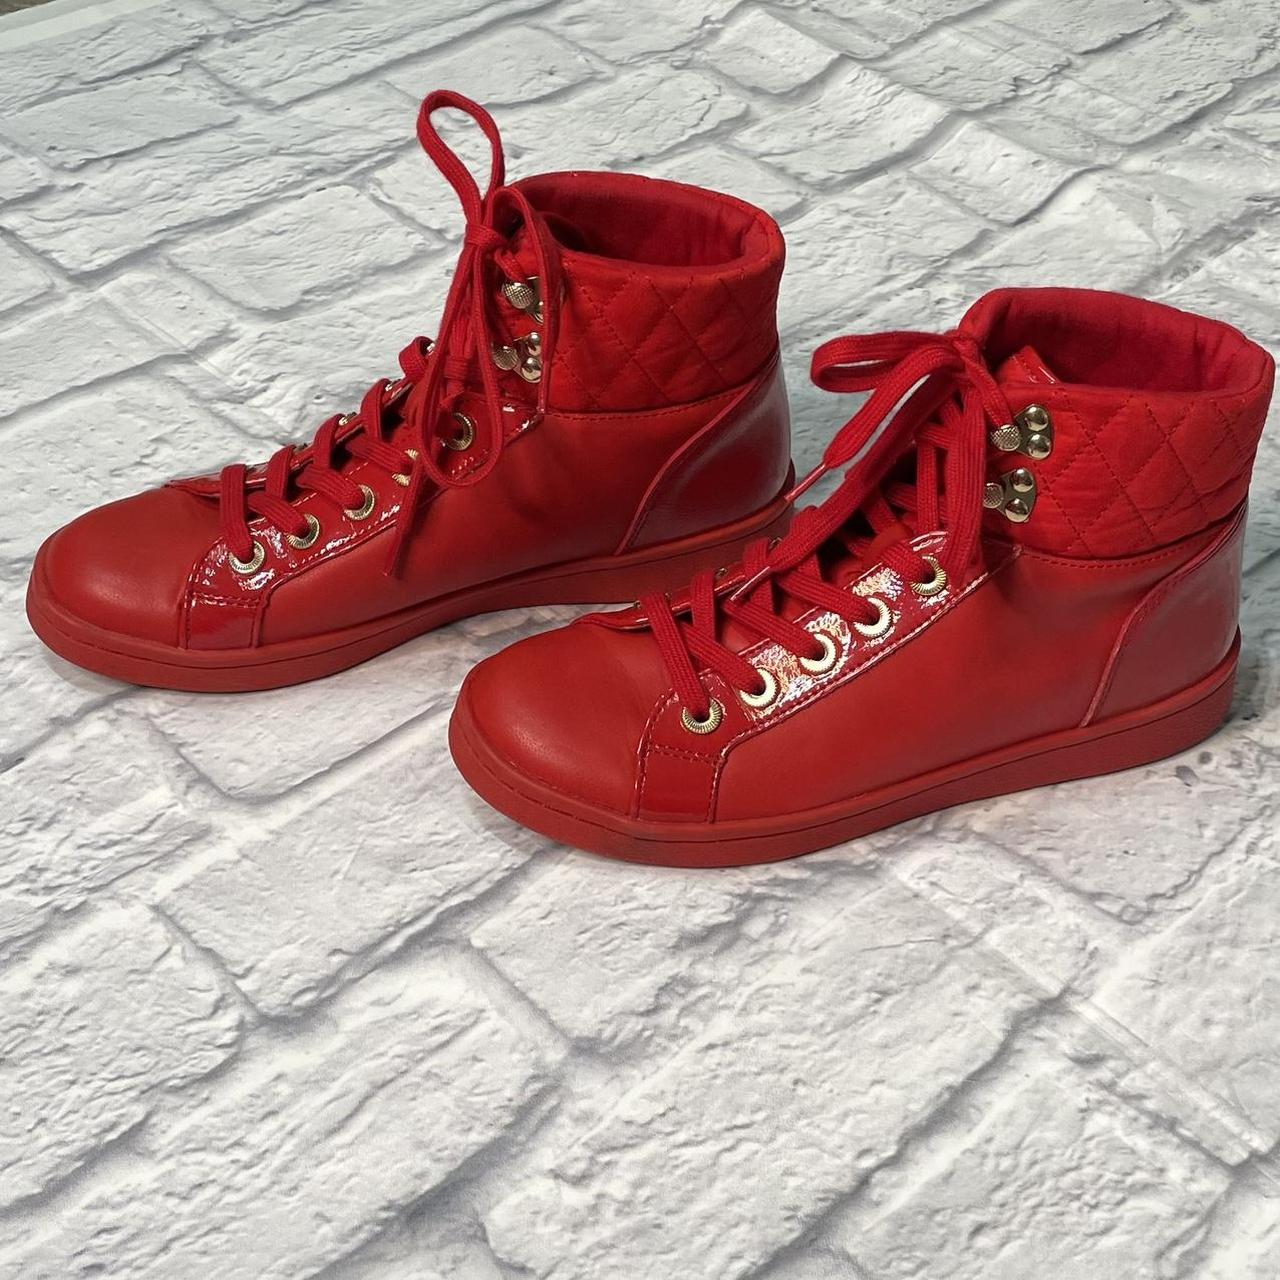 Aldo | Shoes | Worn Once Aldo Choilla Red High Top Sneakers Size 8 Comes In  Original Box | Poshmark